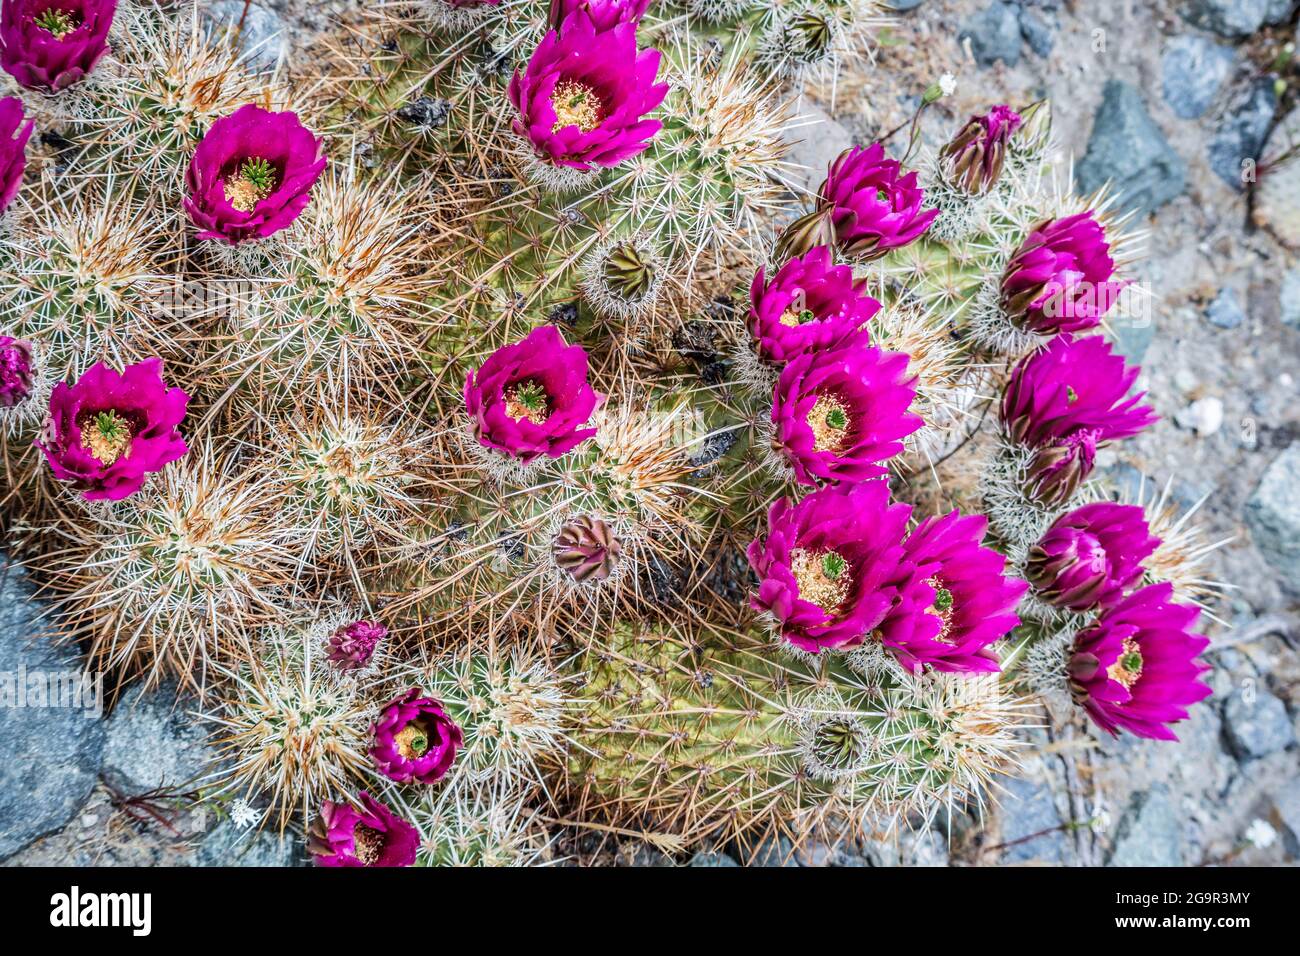 A beautiful portrait shot of a pink flowering cactus in Whitewater Preserve Stock Photo